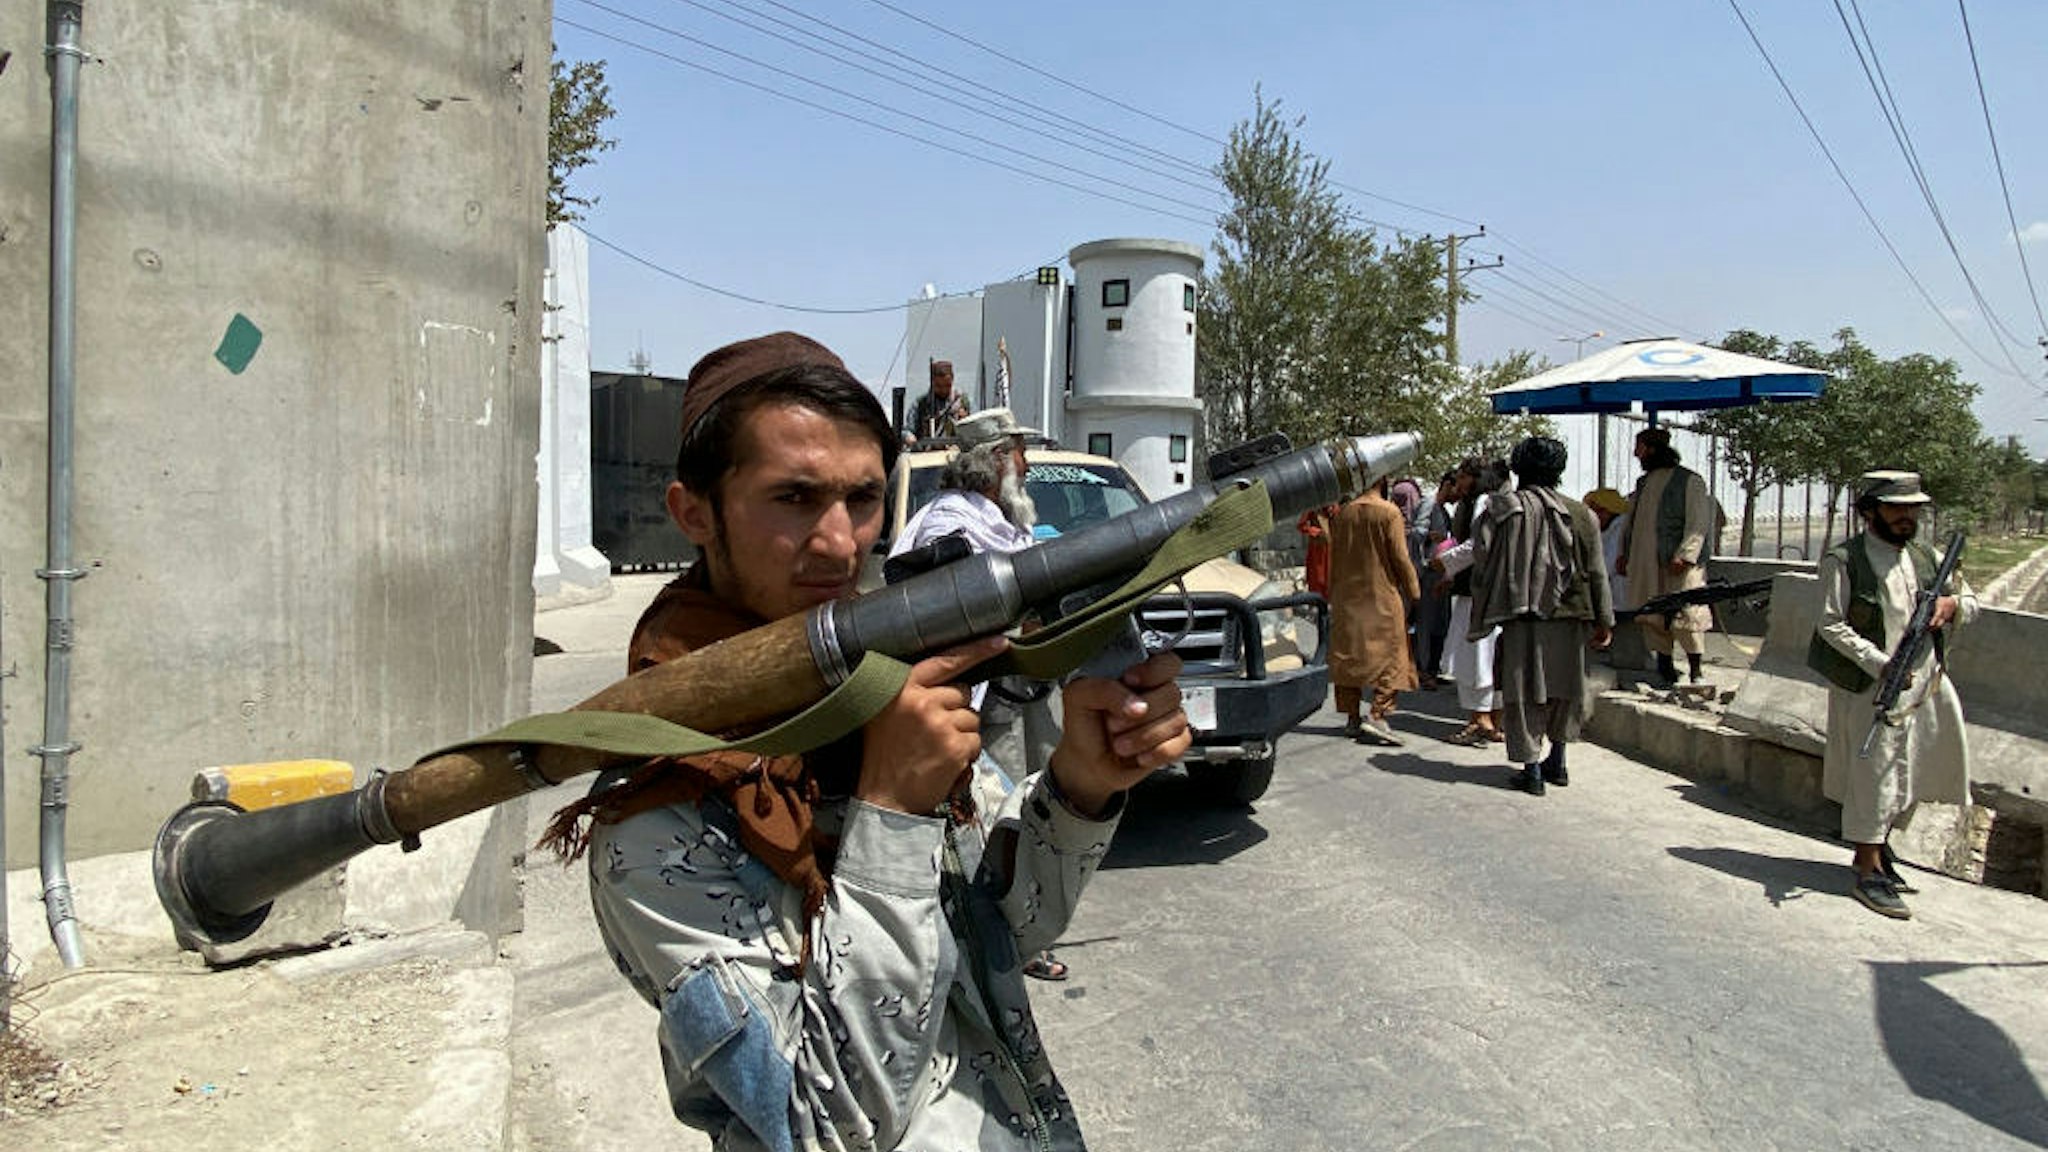 A Taliban fighter holds RPG rocket propelled as he stands guard with others at an entrance gate outside the Interior Ministry in Kabul on August 17, 2021. (Photo by Javed Tanveer / AFP) (Photo by JAVED TANVEER/AFP via Getty Images)